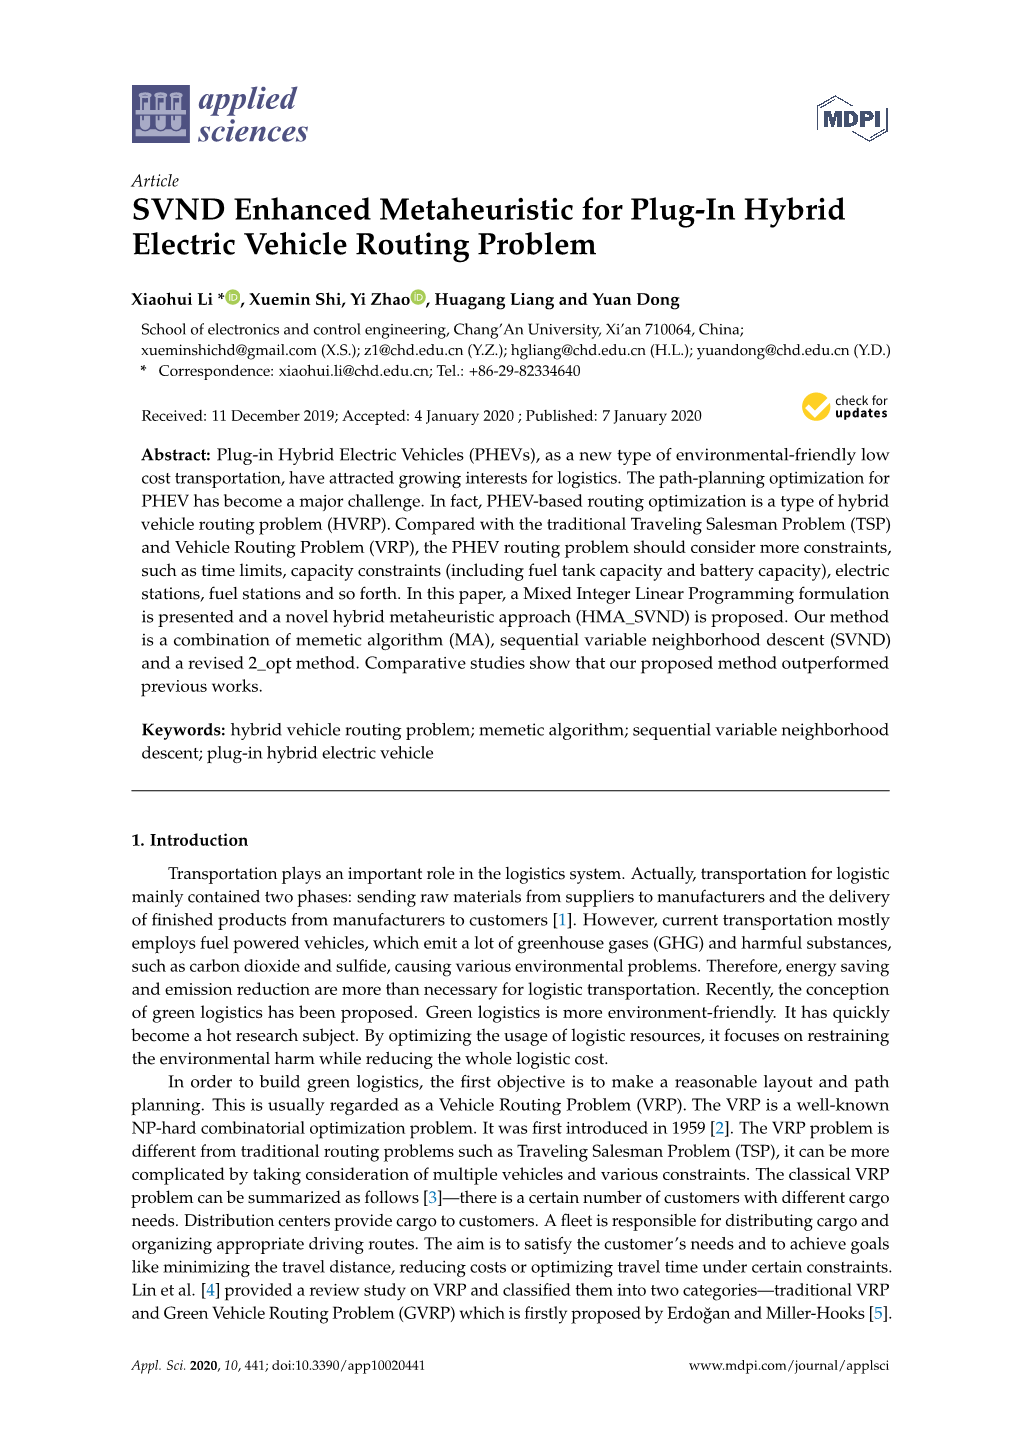 SVND Enhanced Metaheuristic for Plug-In Hybrid Electric Vehicle Routing Problem